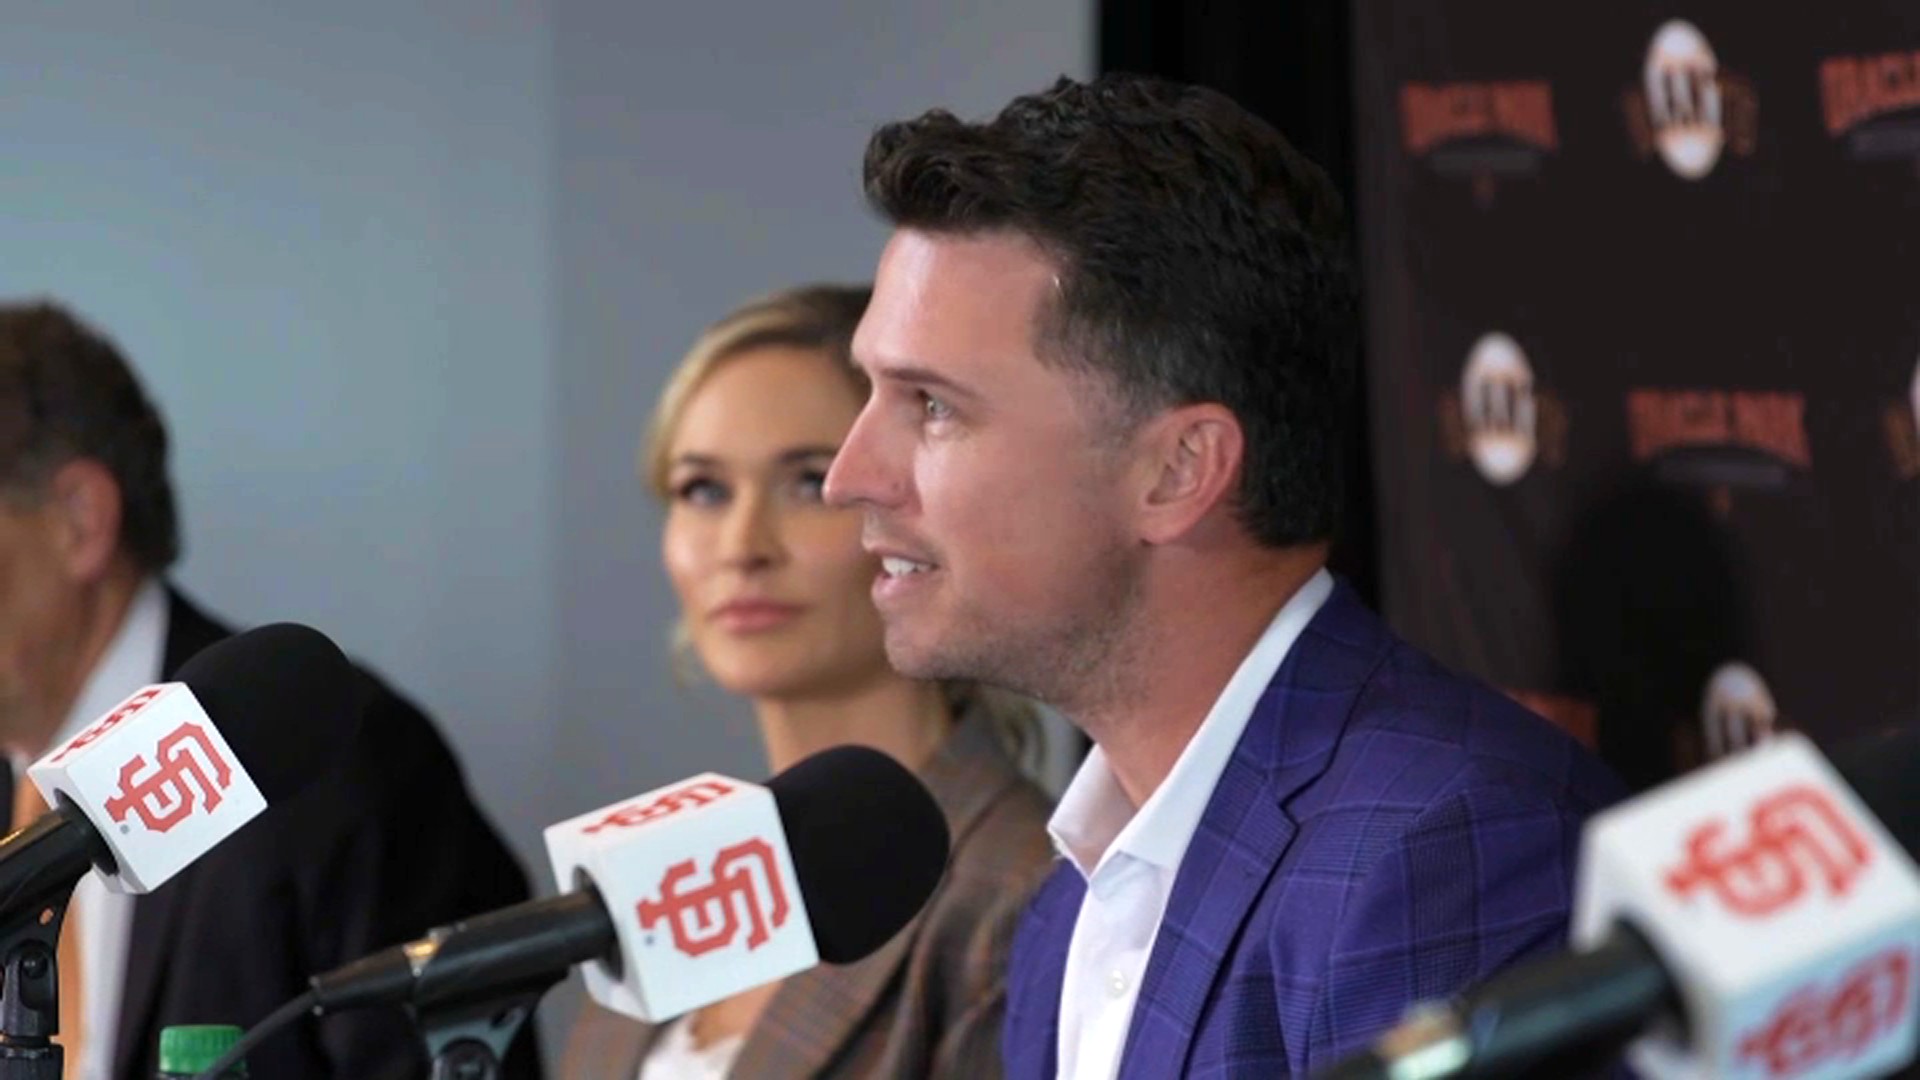 Giants' Buster Posey will opt out of pandemic-shortened 2020 season